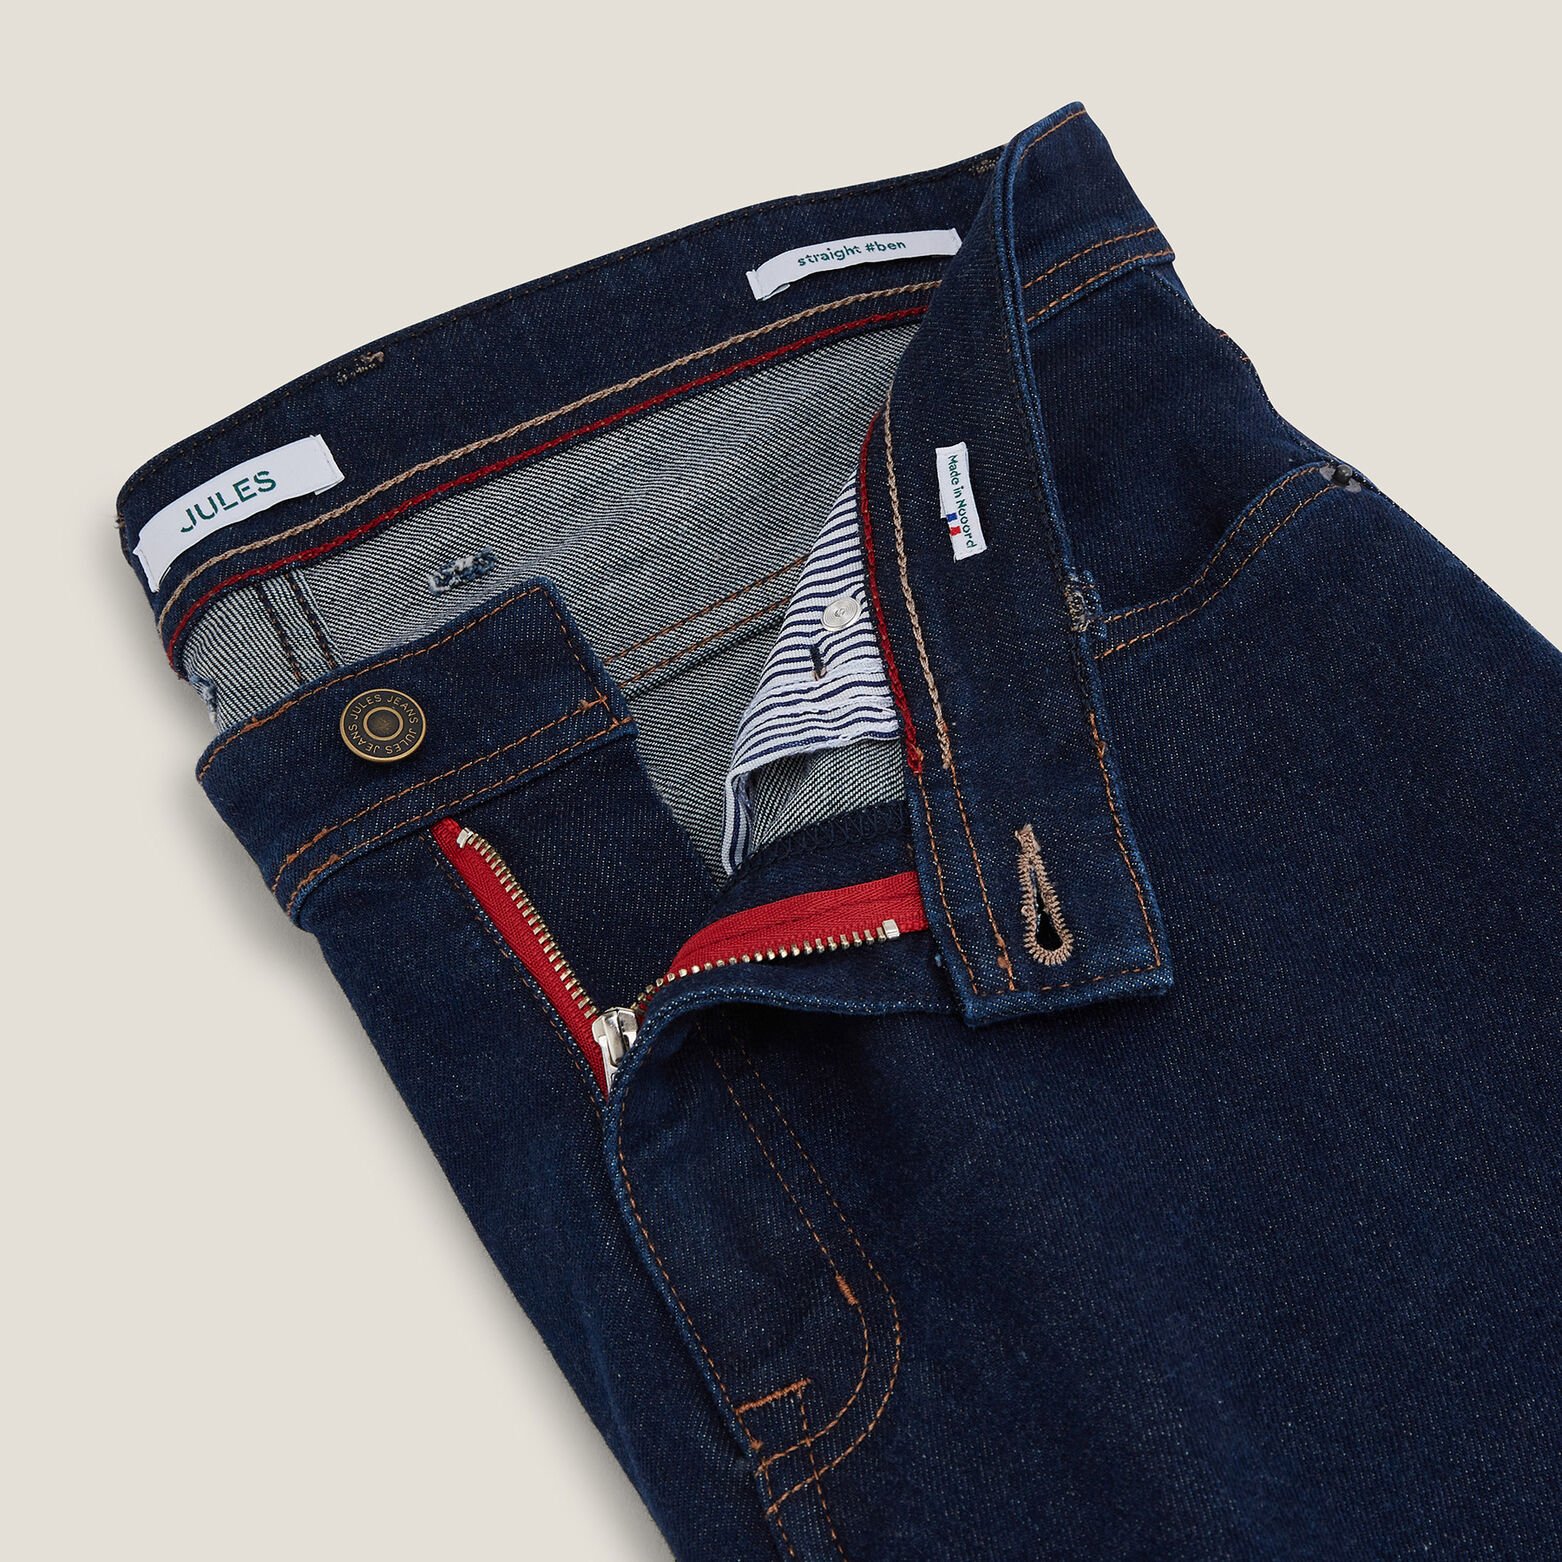 Straight cinq/neuf jeans, 3e editie, Made in Franc